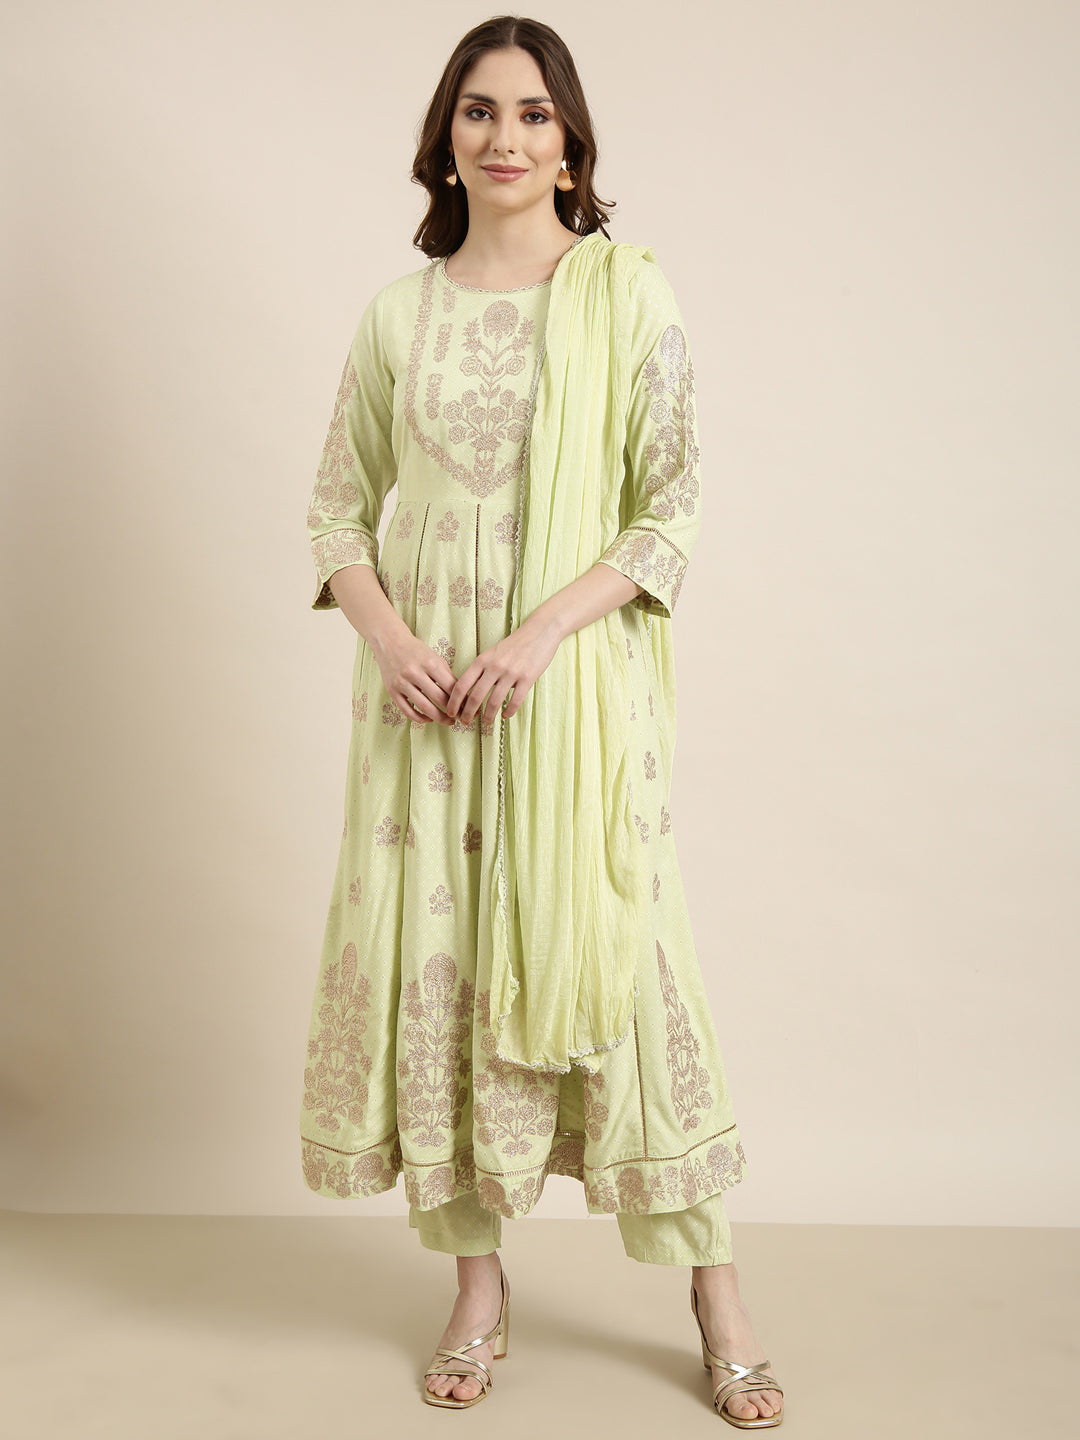 Women Anarkali Green Floral Kurta and Trousers Set Comes With Dupatta and Potli Bag